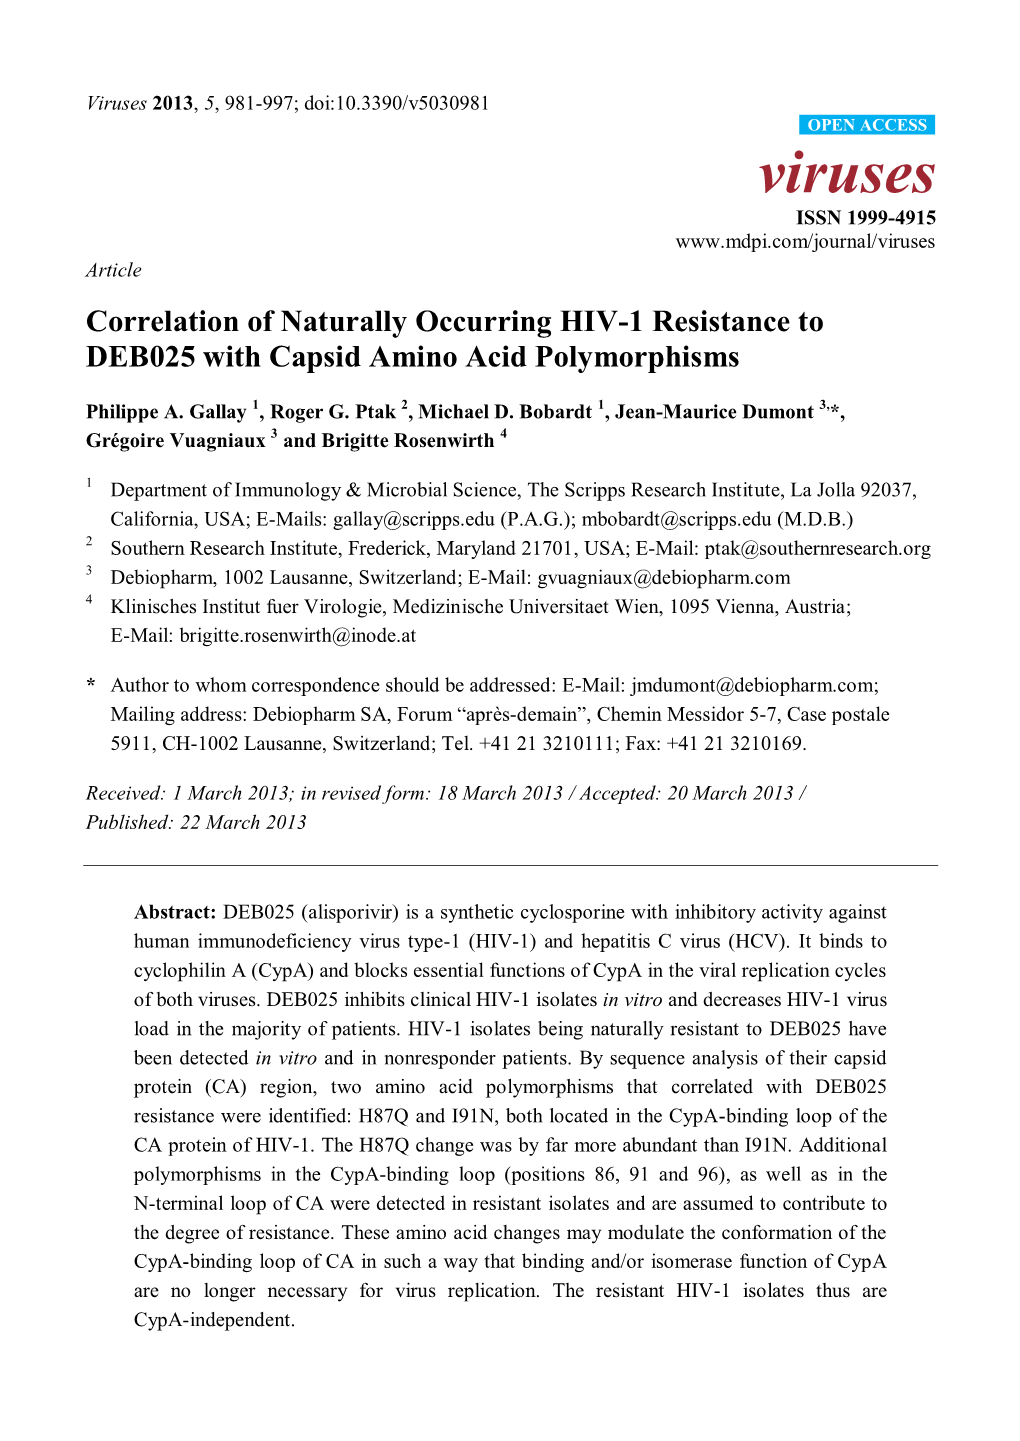 Correlation of Naturally Occurring HIV-1 Resistance to DEB025 with Capsid Amino Acid Polymorphisms